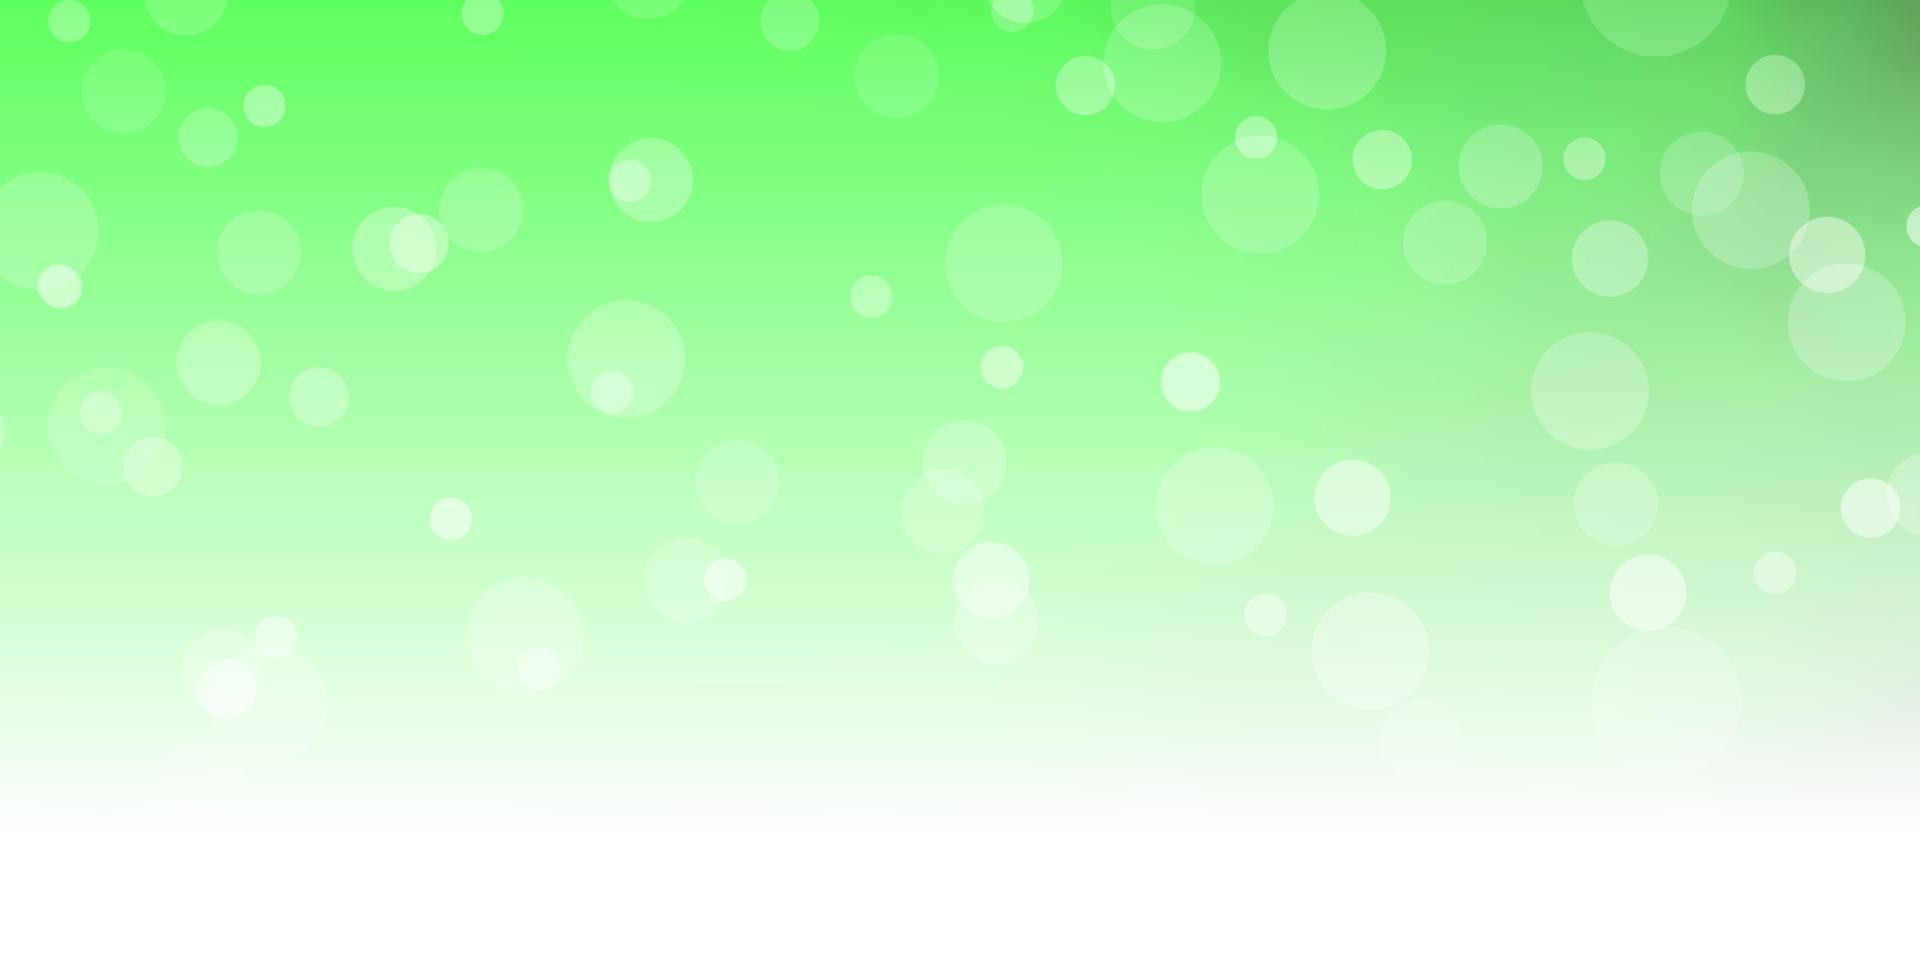 Light Green vector layout with circles.